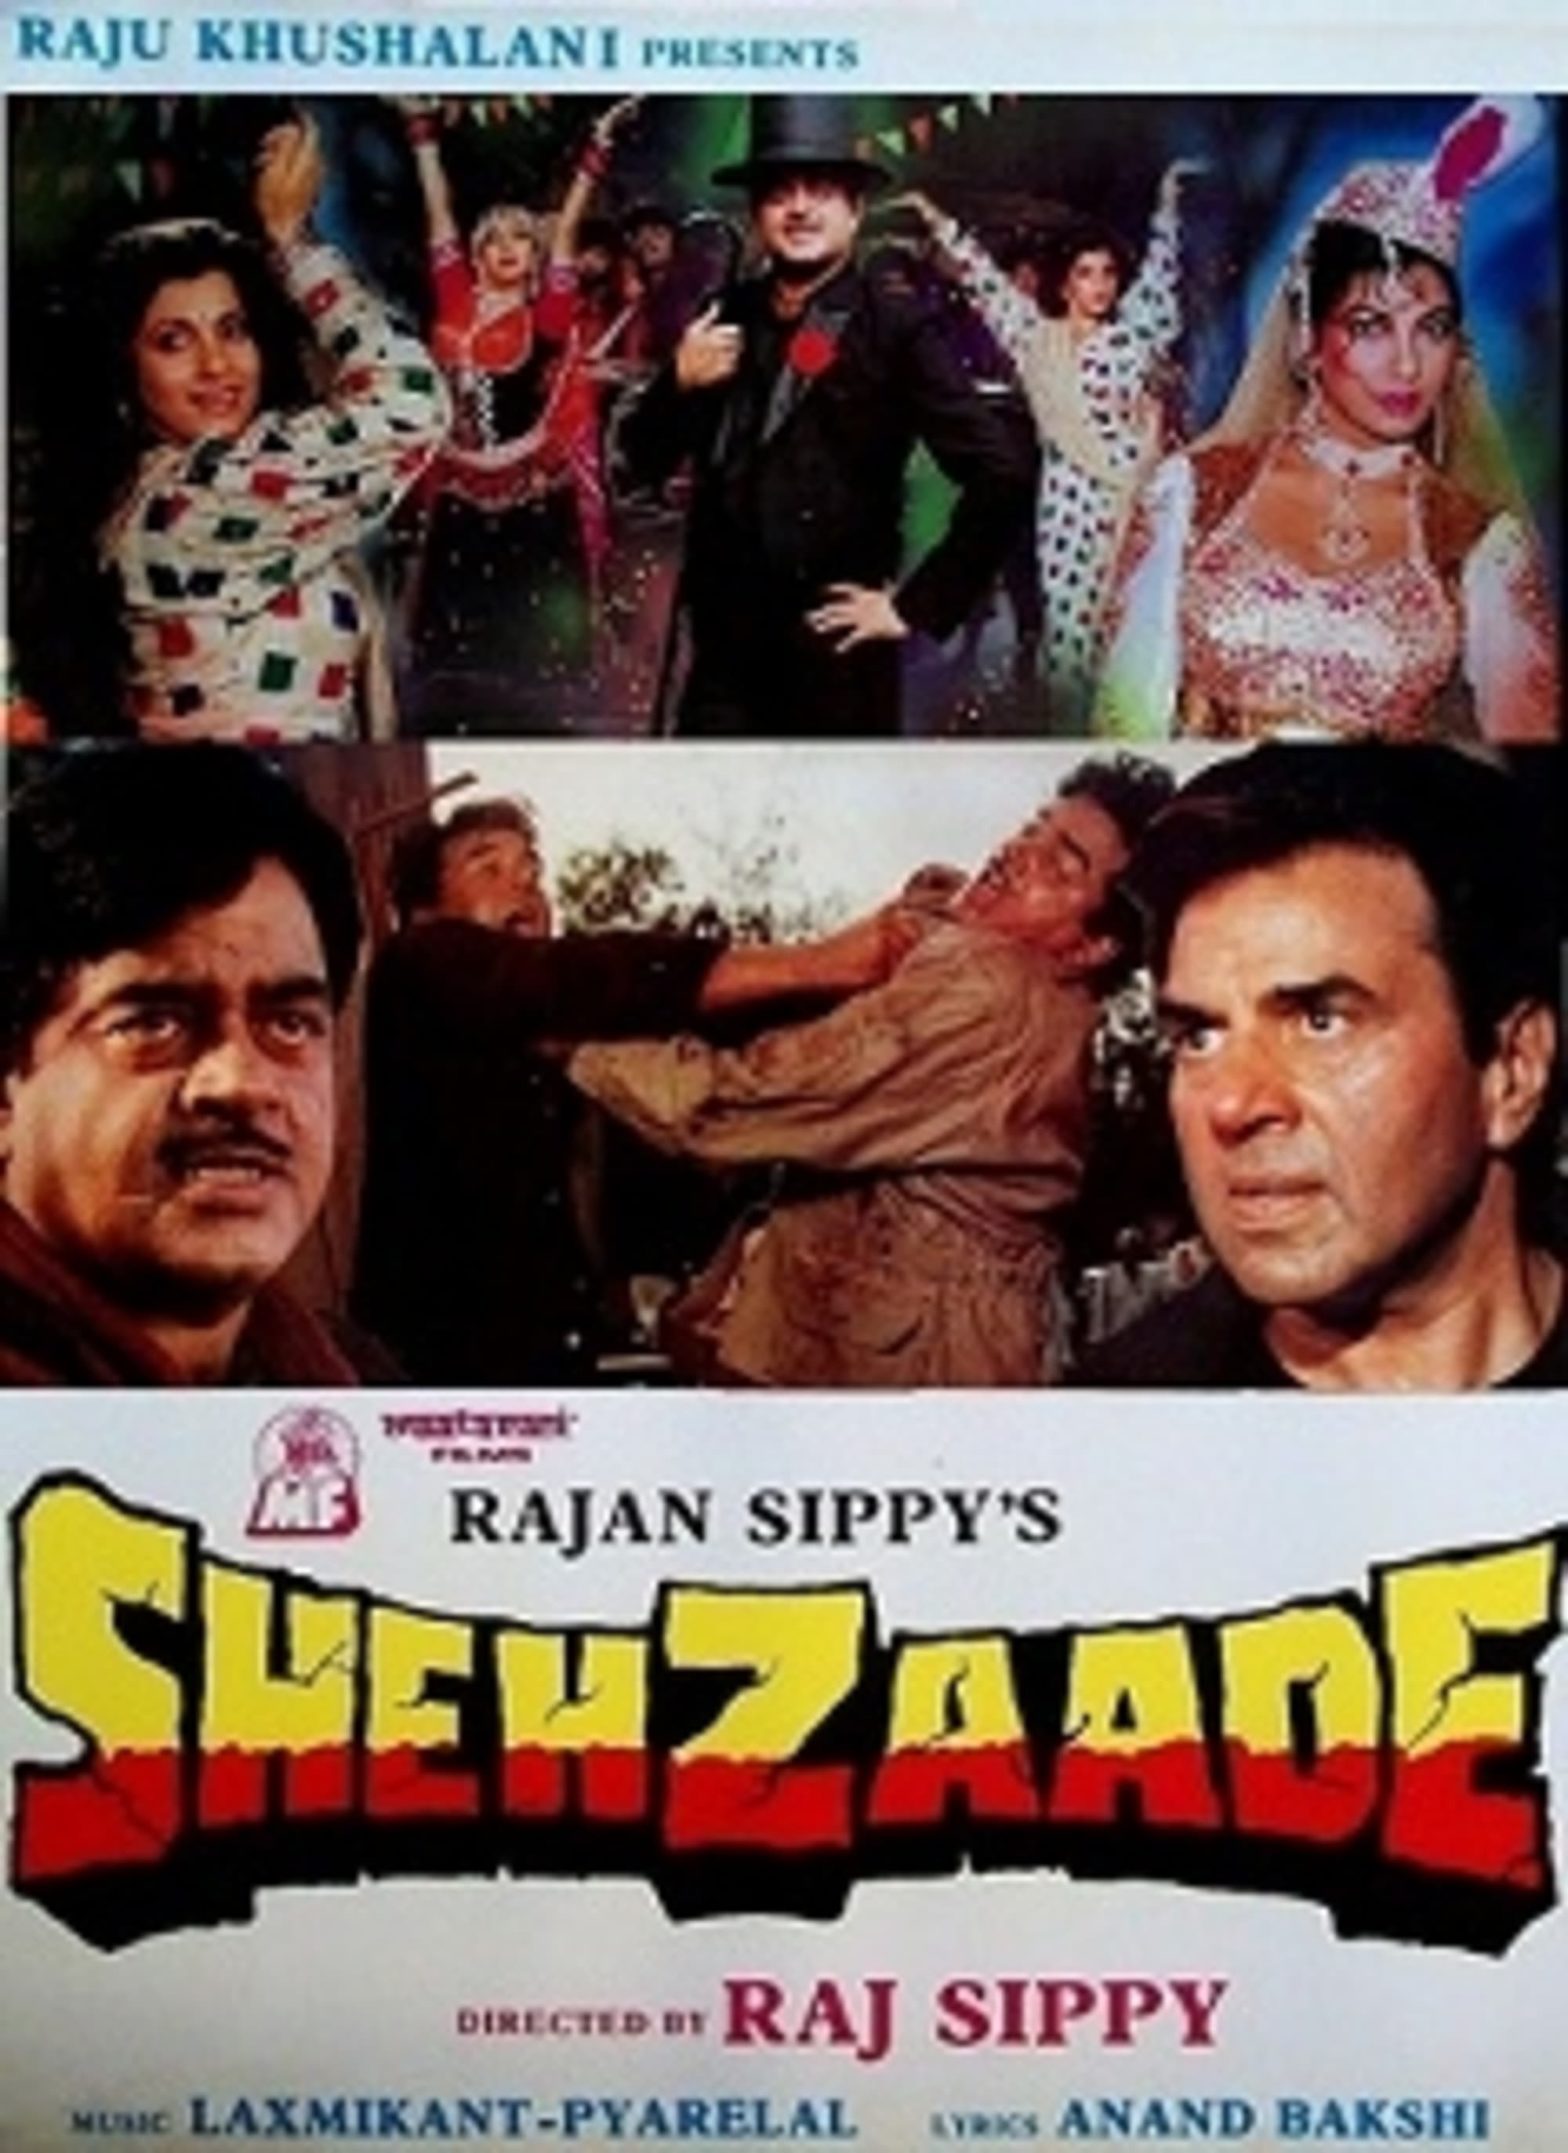 Poster for the movie "Shehzaade"